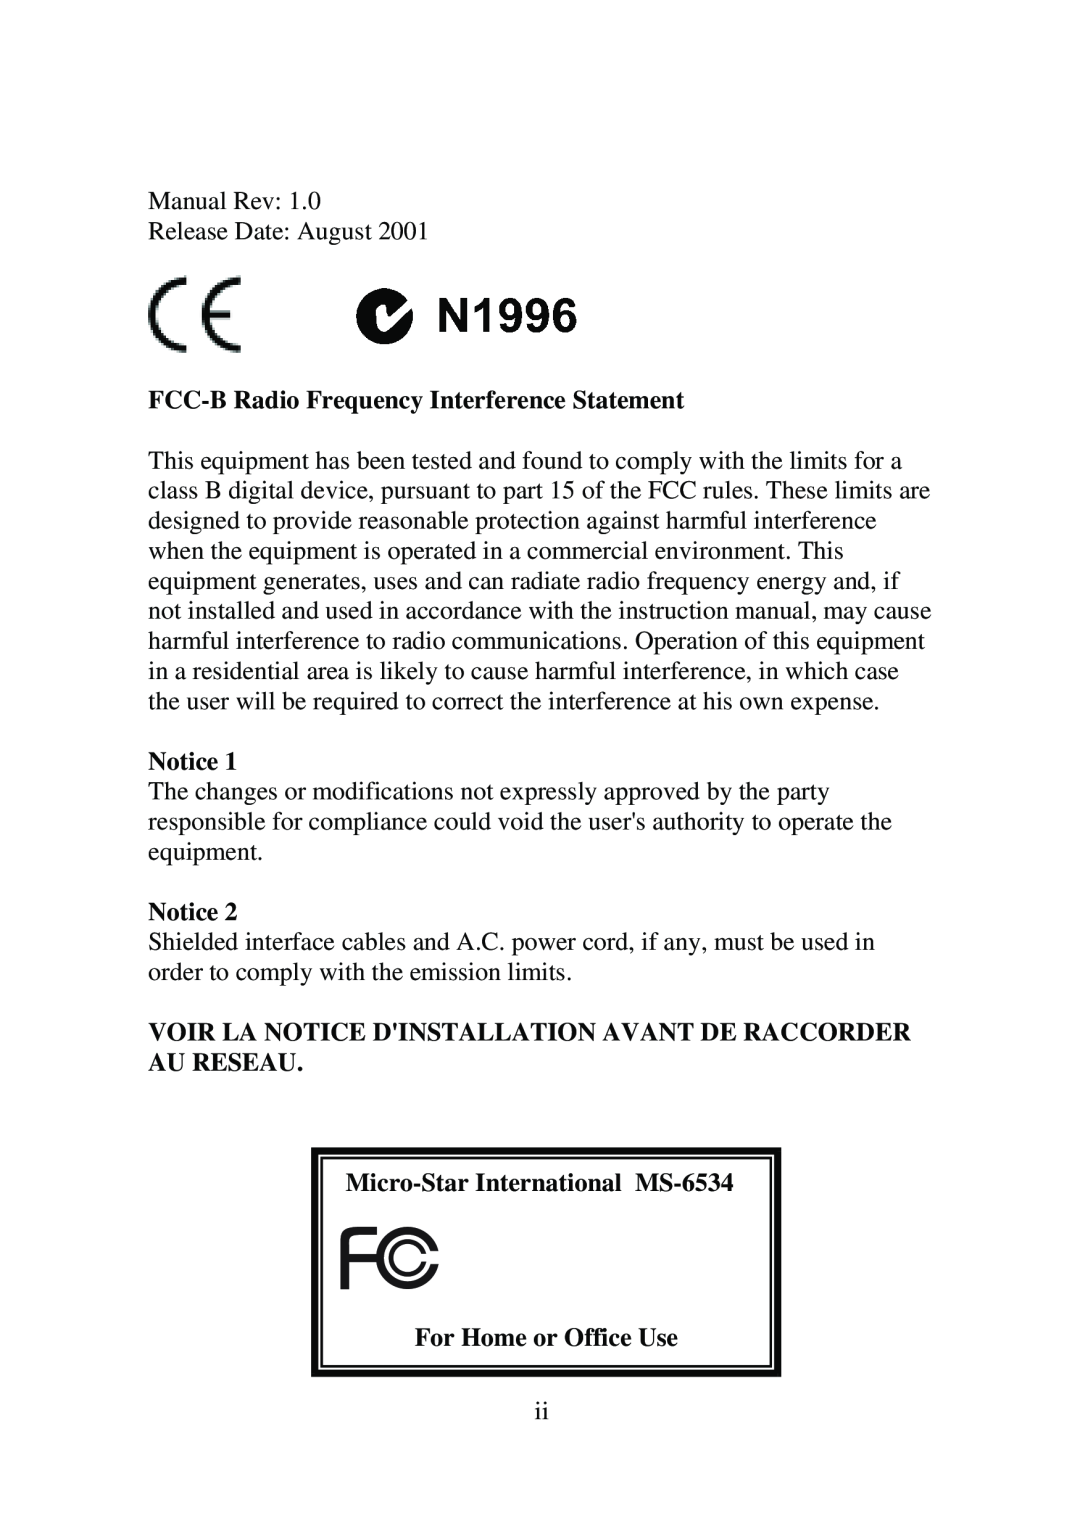 Premio Computer Aries/Centella manual FCC-B Radio Frequency Interference Statement, For Home or Office Use 